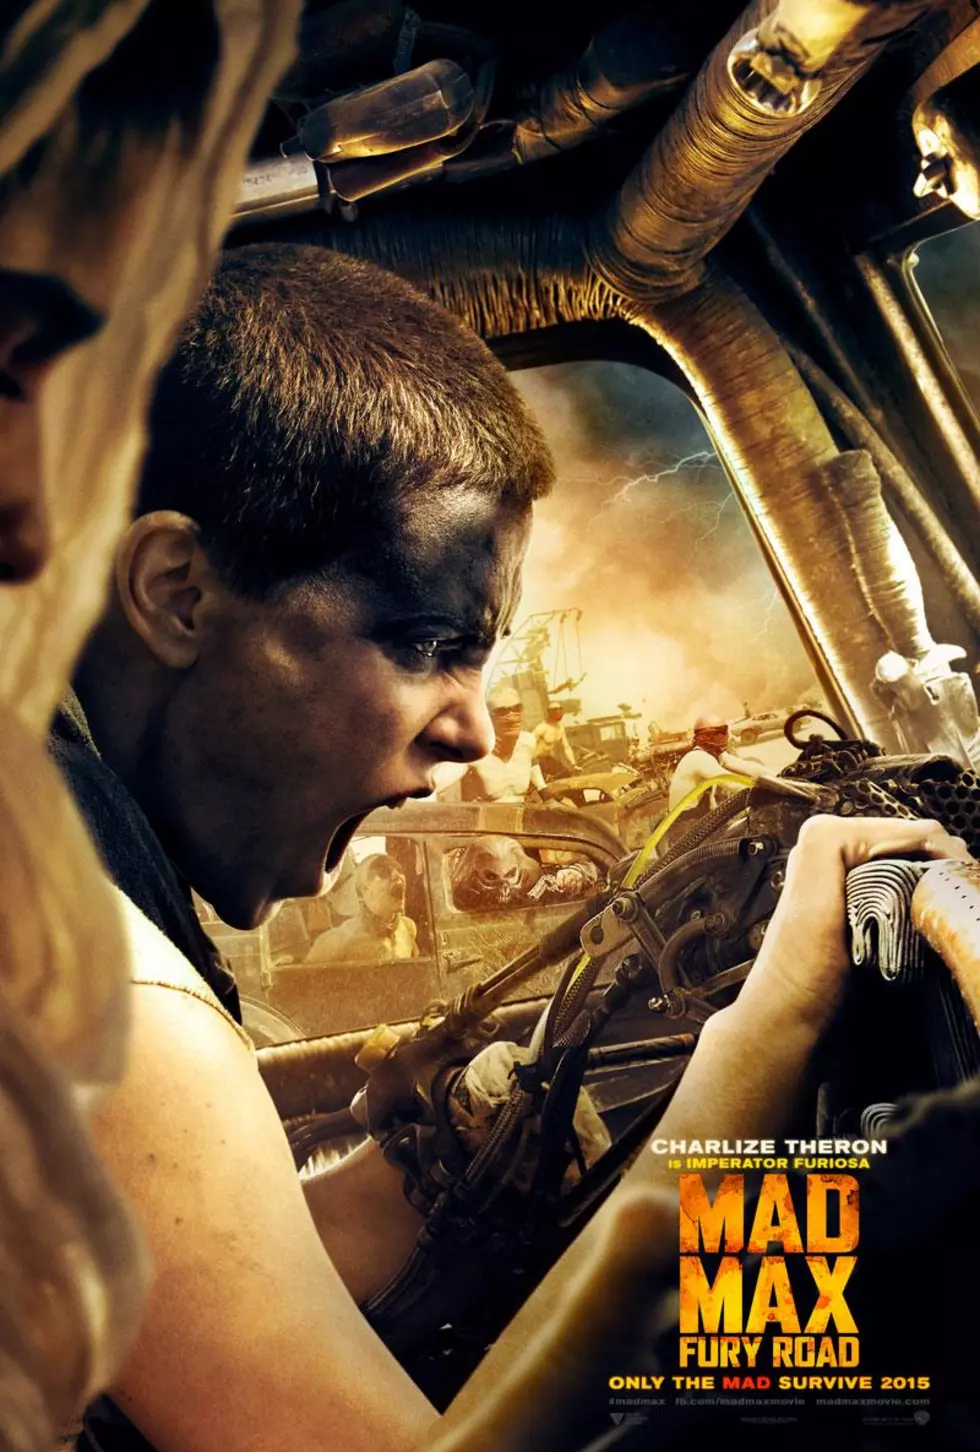 Mad Max: Fury Road – Official Theatrical Teaser Trailer [VIDEO]